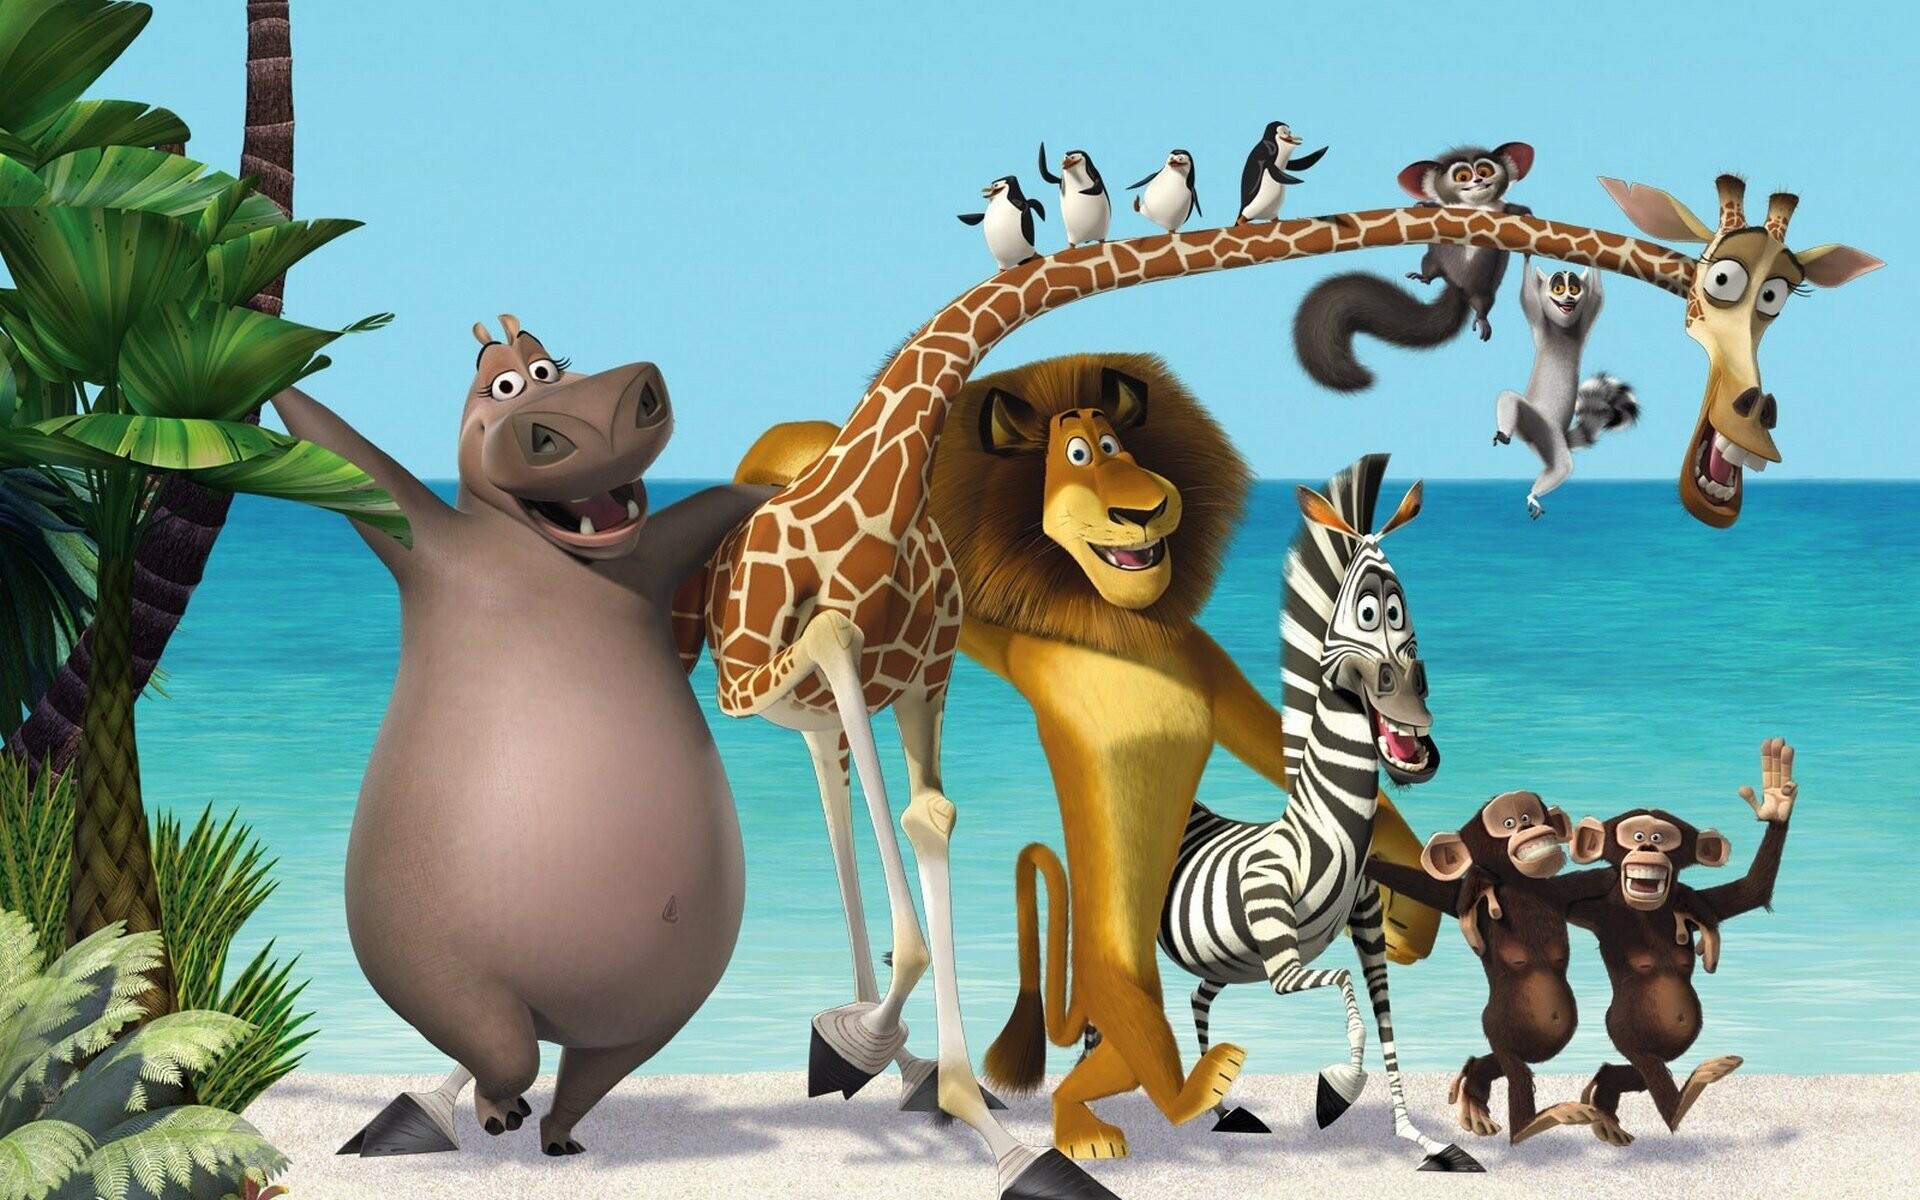 Madagascar (Movie): Europe's Most Wanted, A 2012 American computer-animated circus comedy film, The third installment. 1920x1200 HD Background.